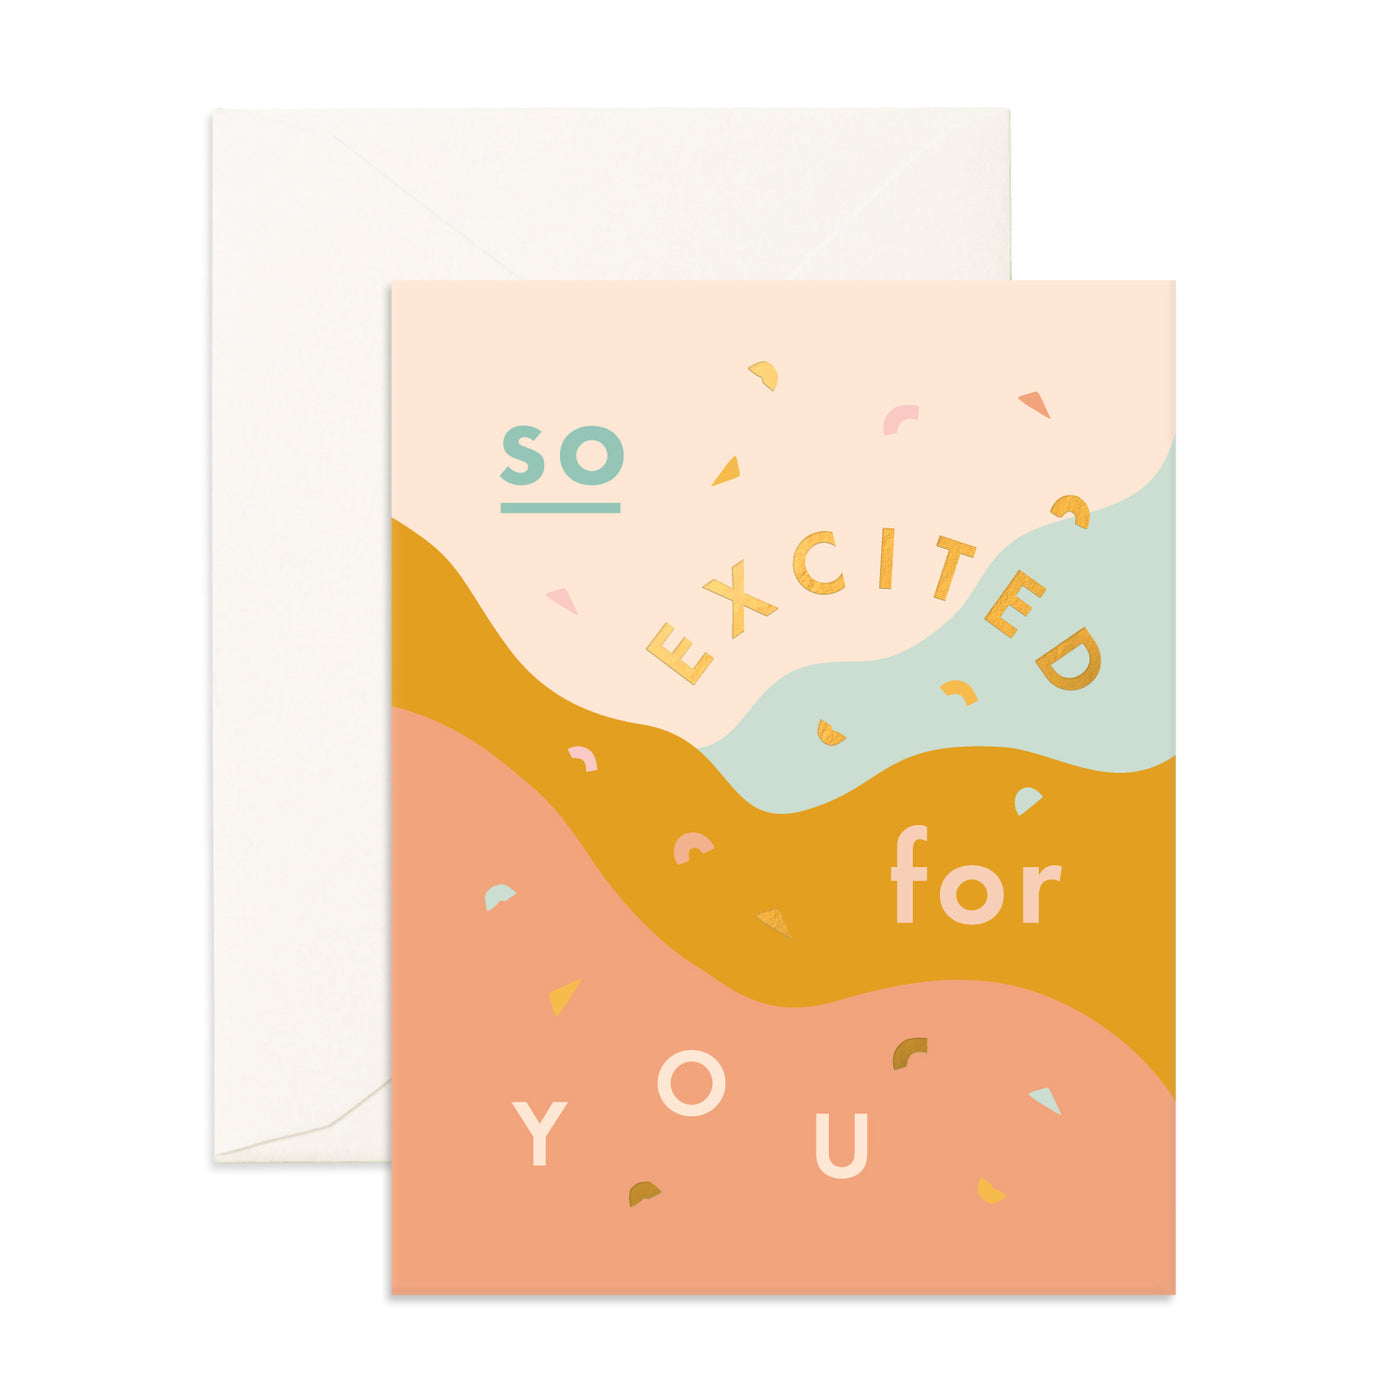 'So Excited for You' Greeting Card